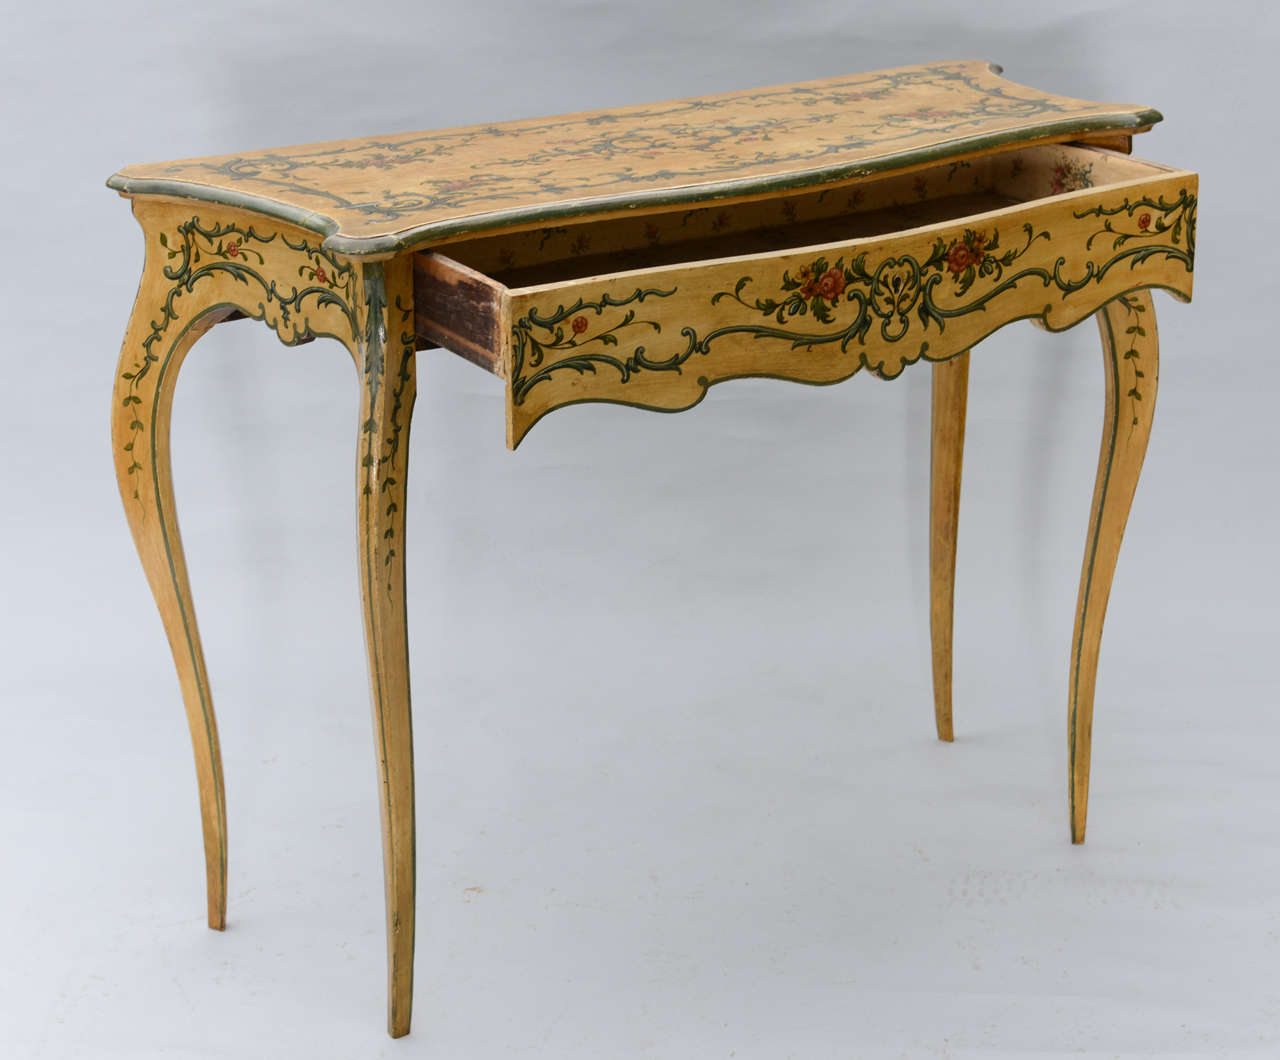 Hand-Painted Hand Painted 19th Century Console Table